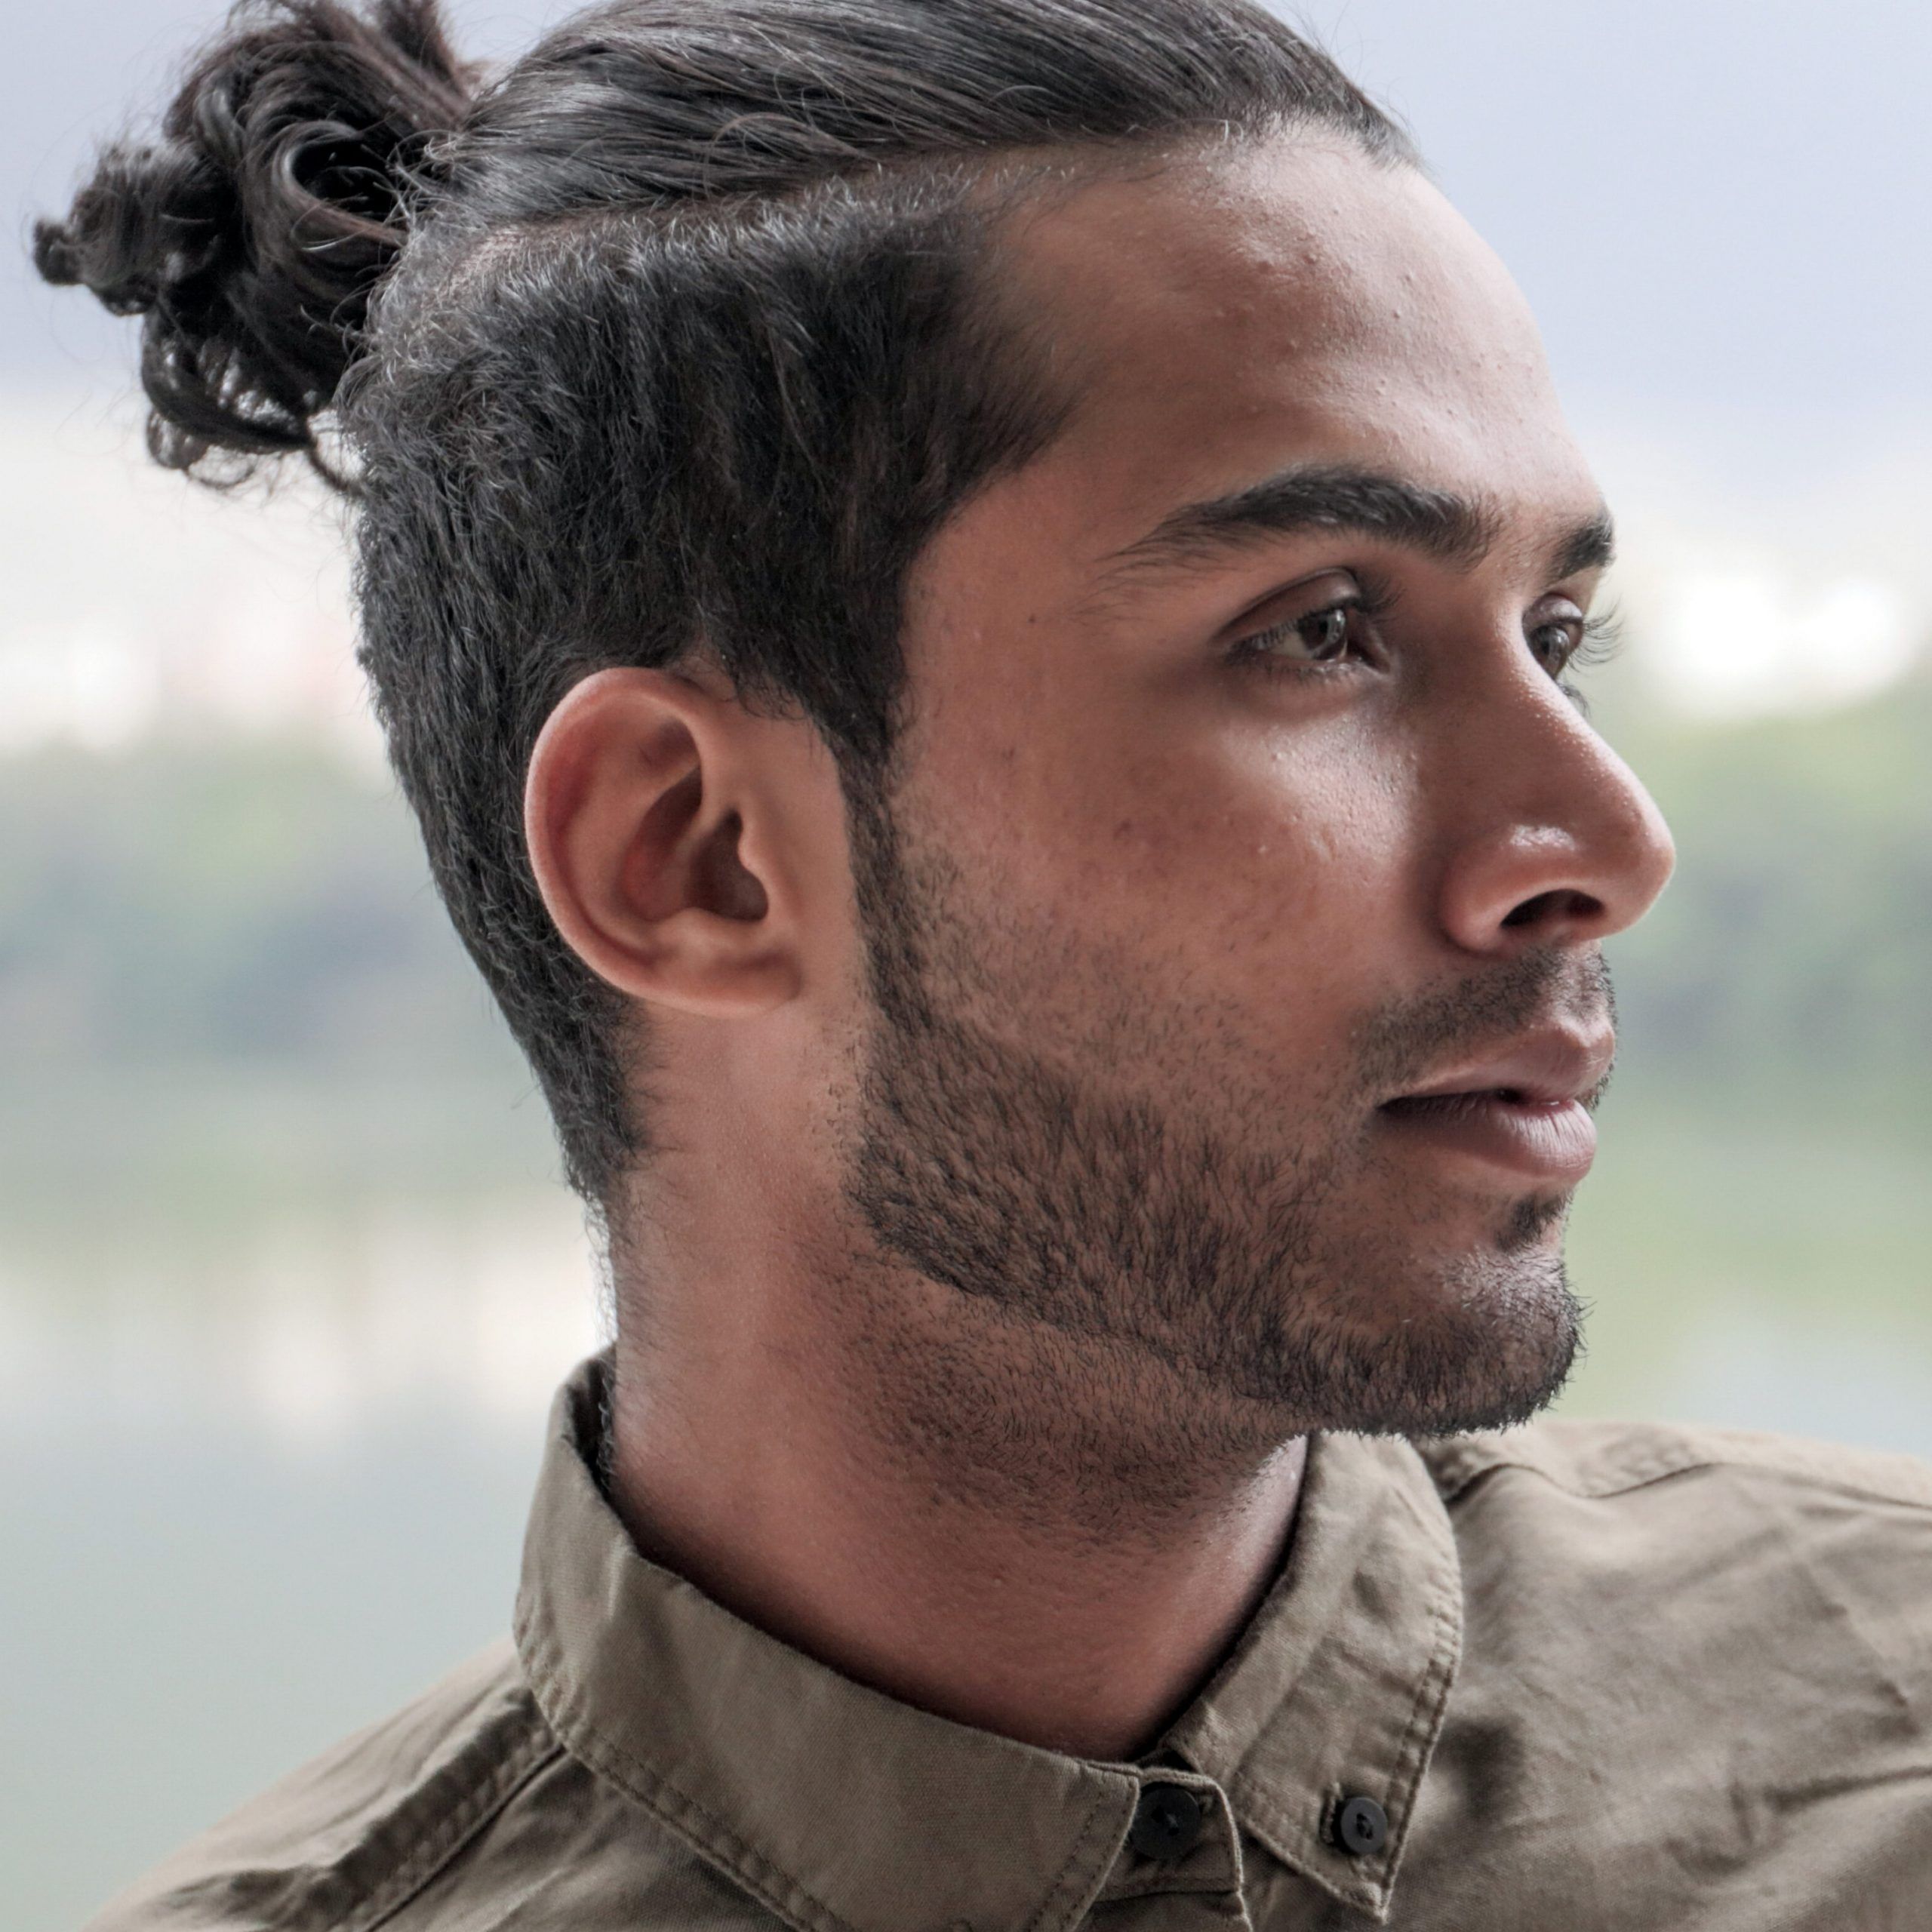 20+ Top Knot Hairstyles: Visual Guide For Men | Haircut Inspiration In Recent Medium Length Wavy Hairstyles With Top Knot (View 5 of 25)